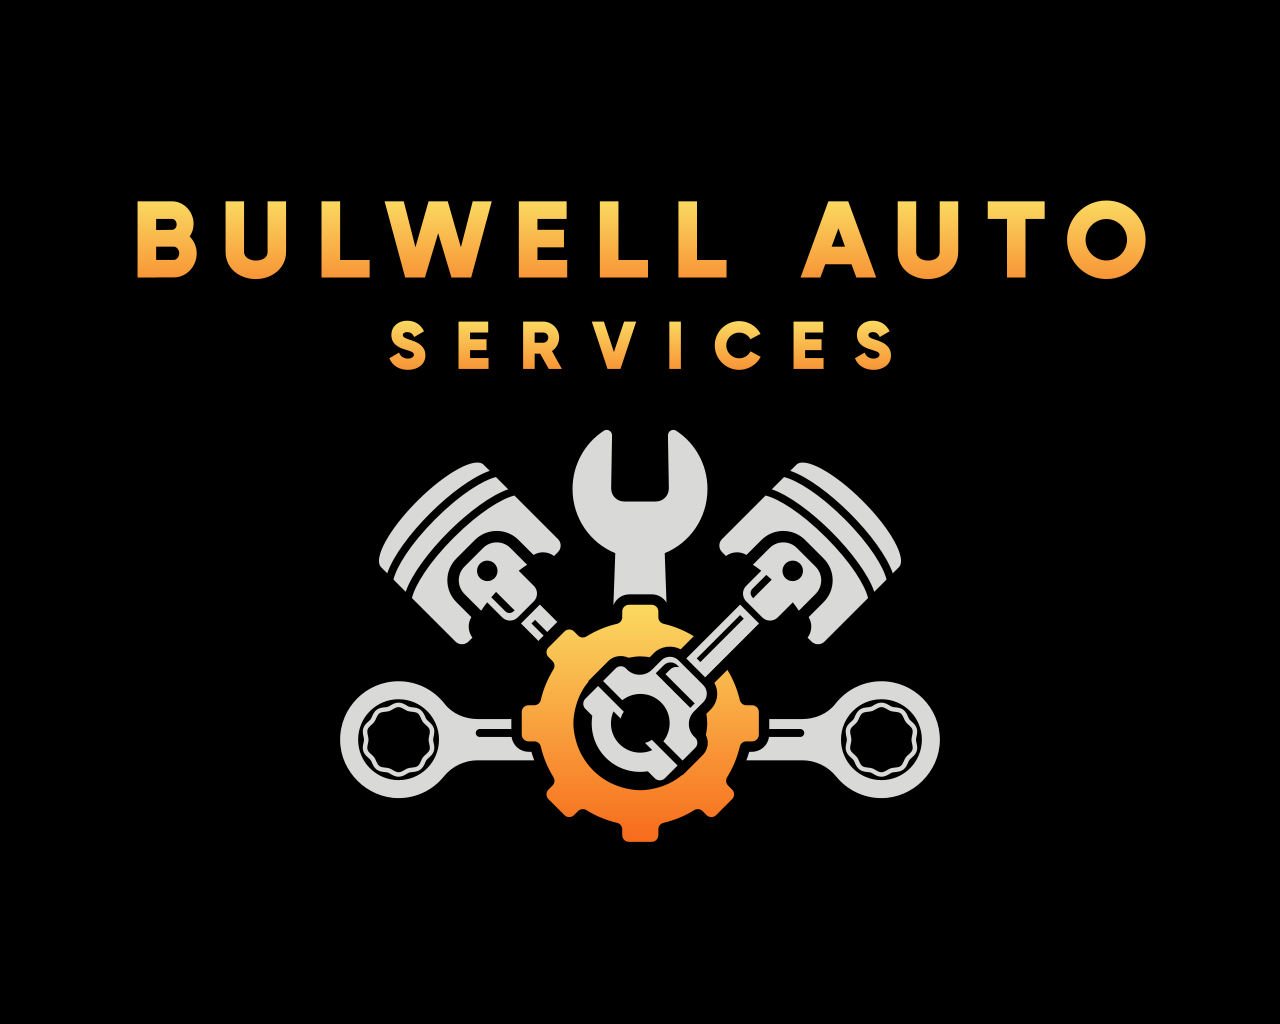 Bulwell Auto Services